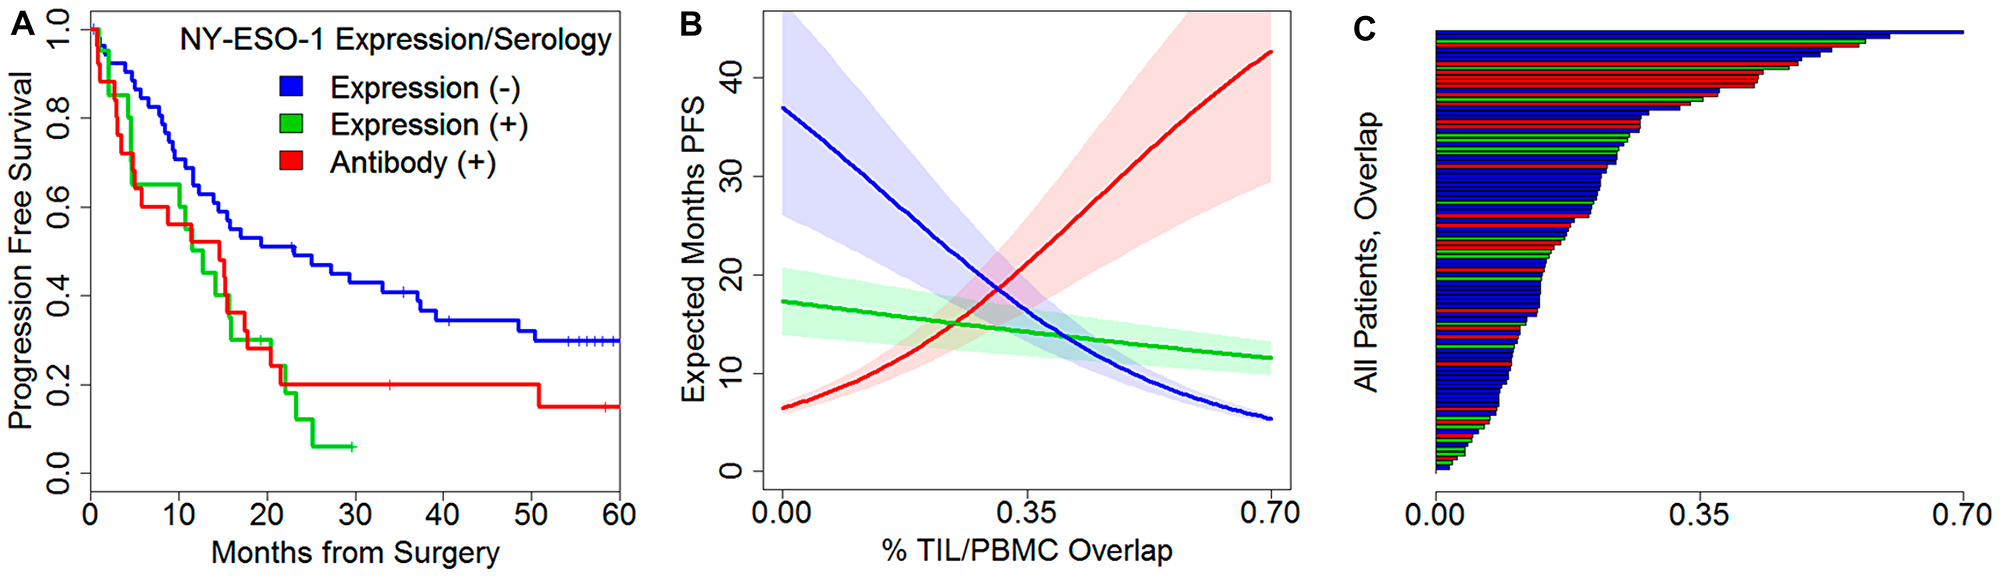 Prognostic effects of NY-ESO-1 expression and serology with TCR repertoire features.